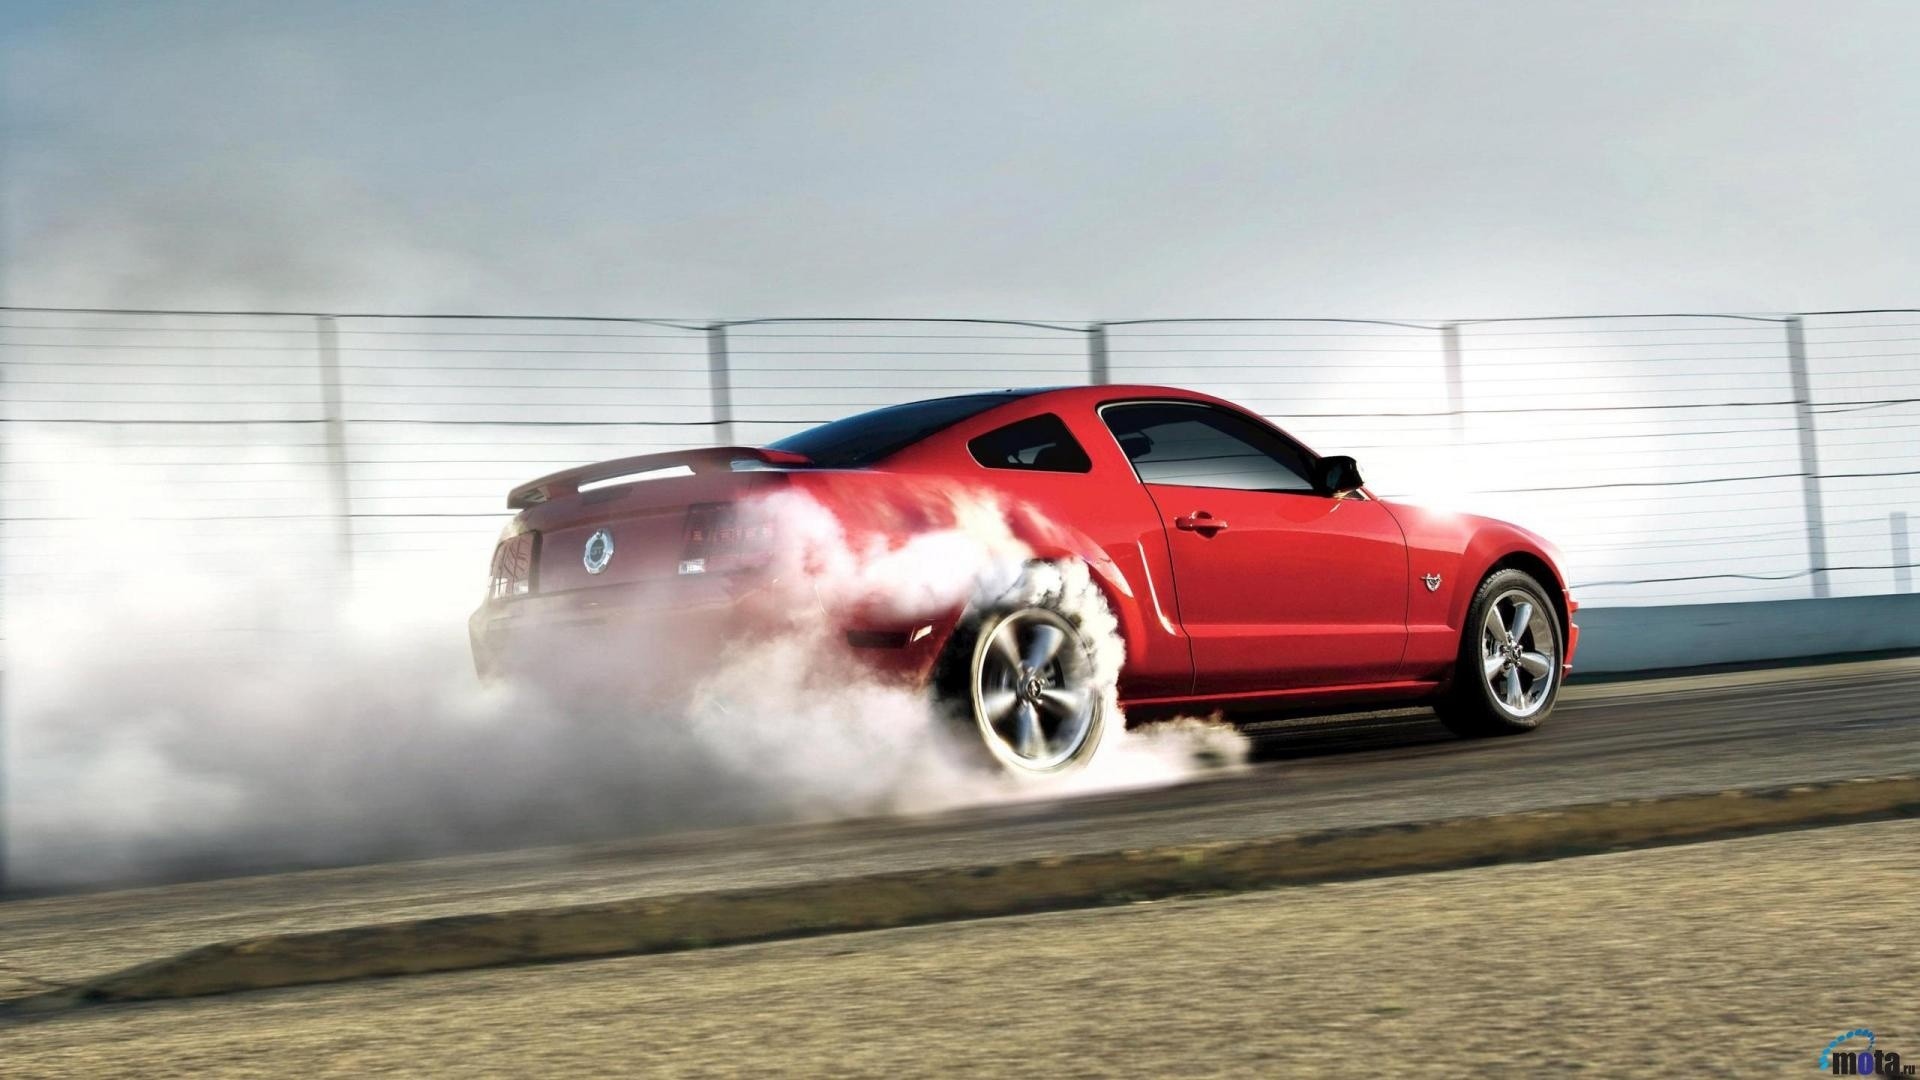 General 1920x1080 Ford Mustang Shelby car Shelby red cars smoke vehicle Ford Ford Mustang Ford Mustang S-197 muscle cars American cars burnout